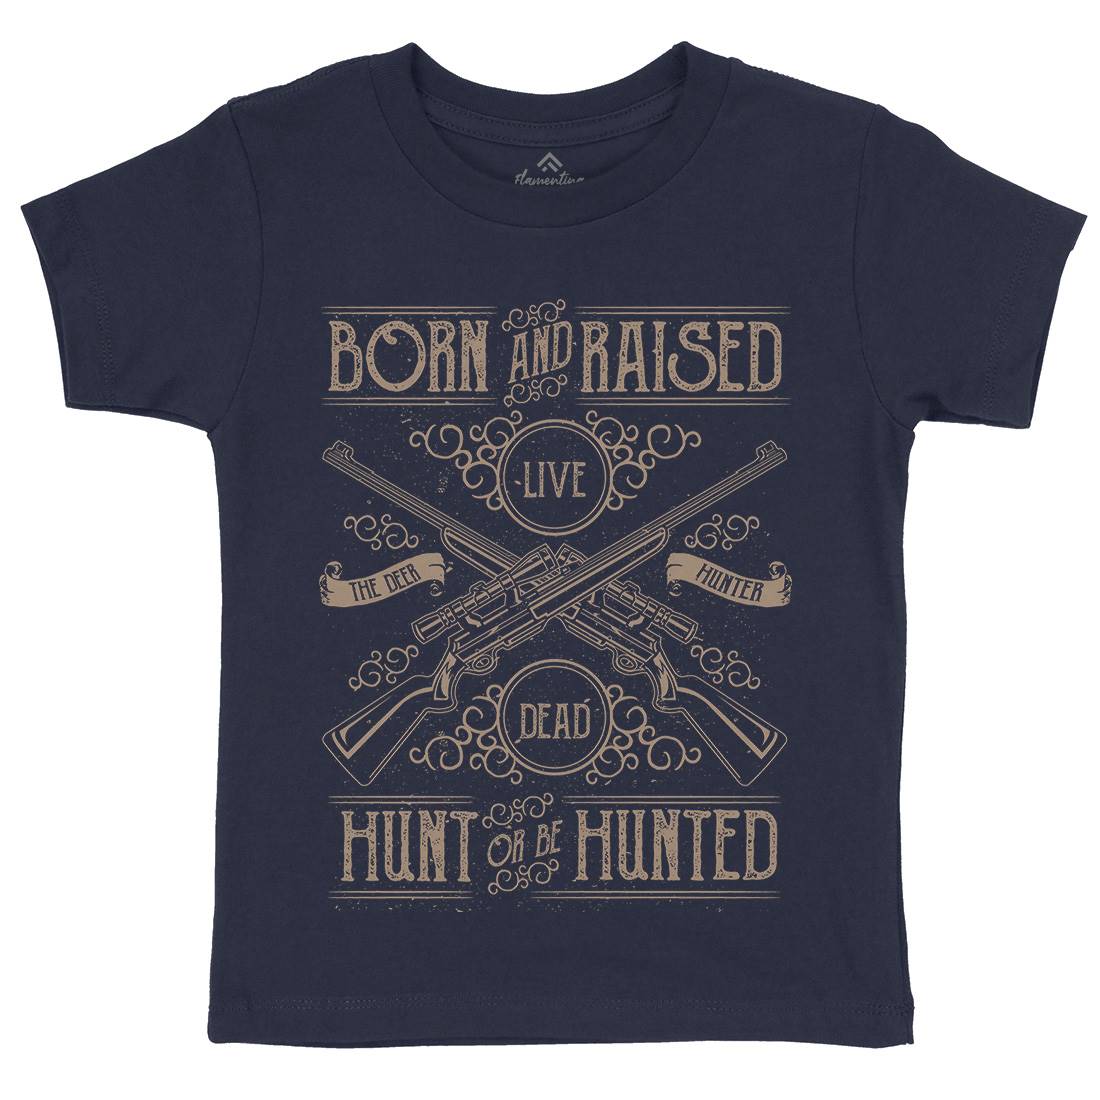 Hunt Or Be Hunted Kids Crew Neck T-Shirt Sport A069